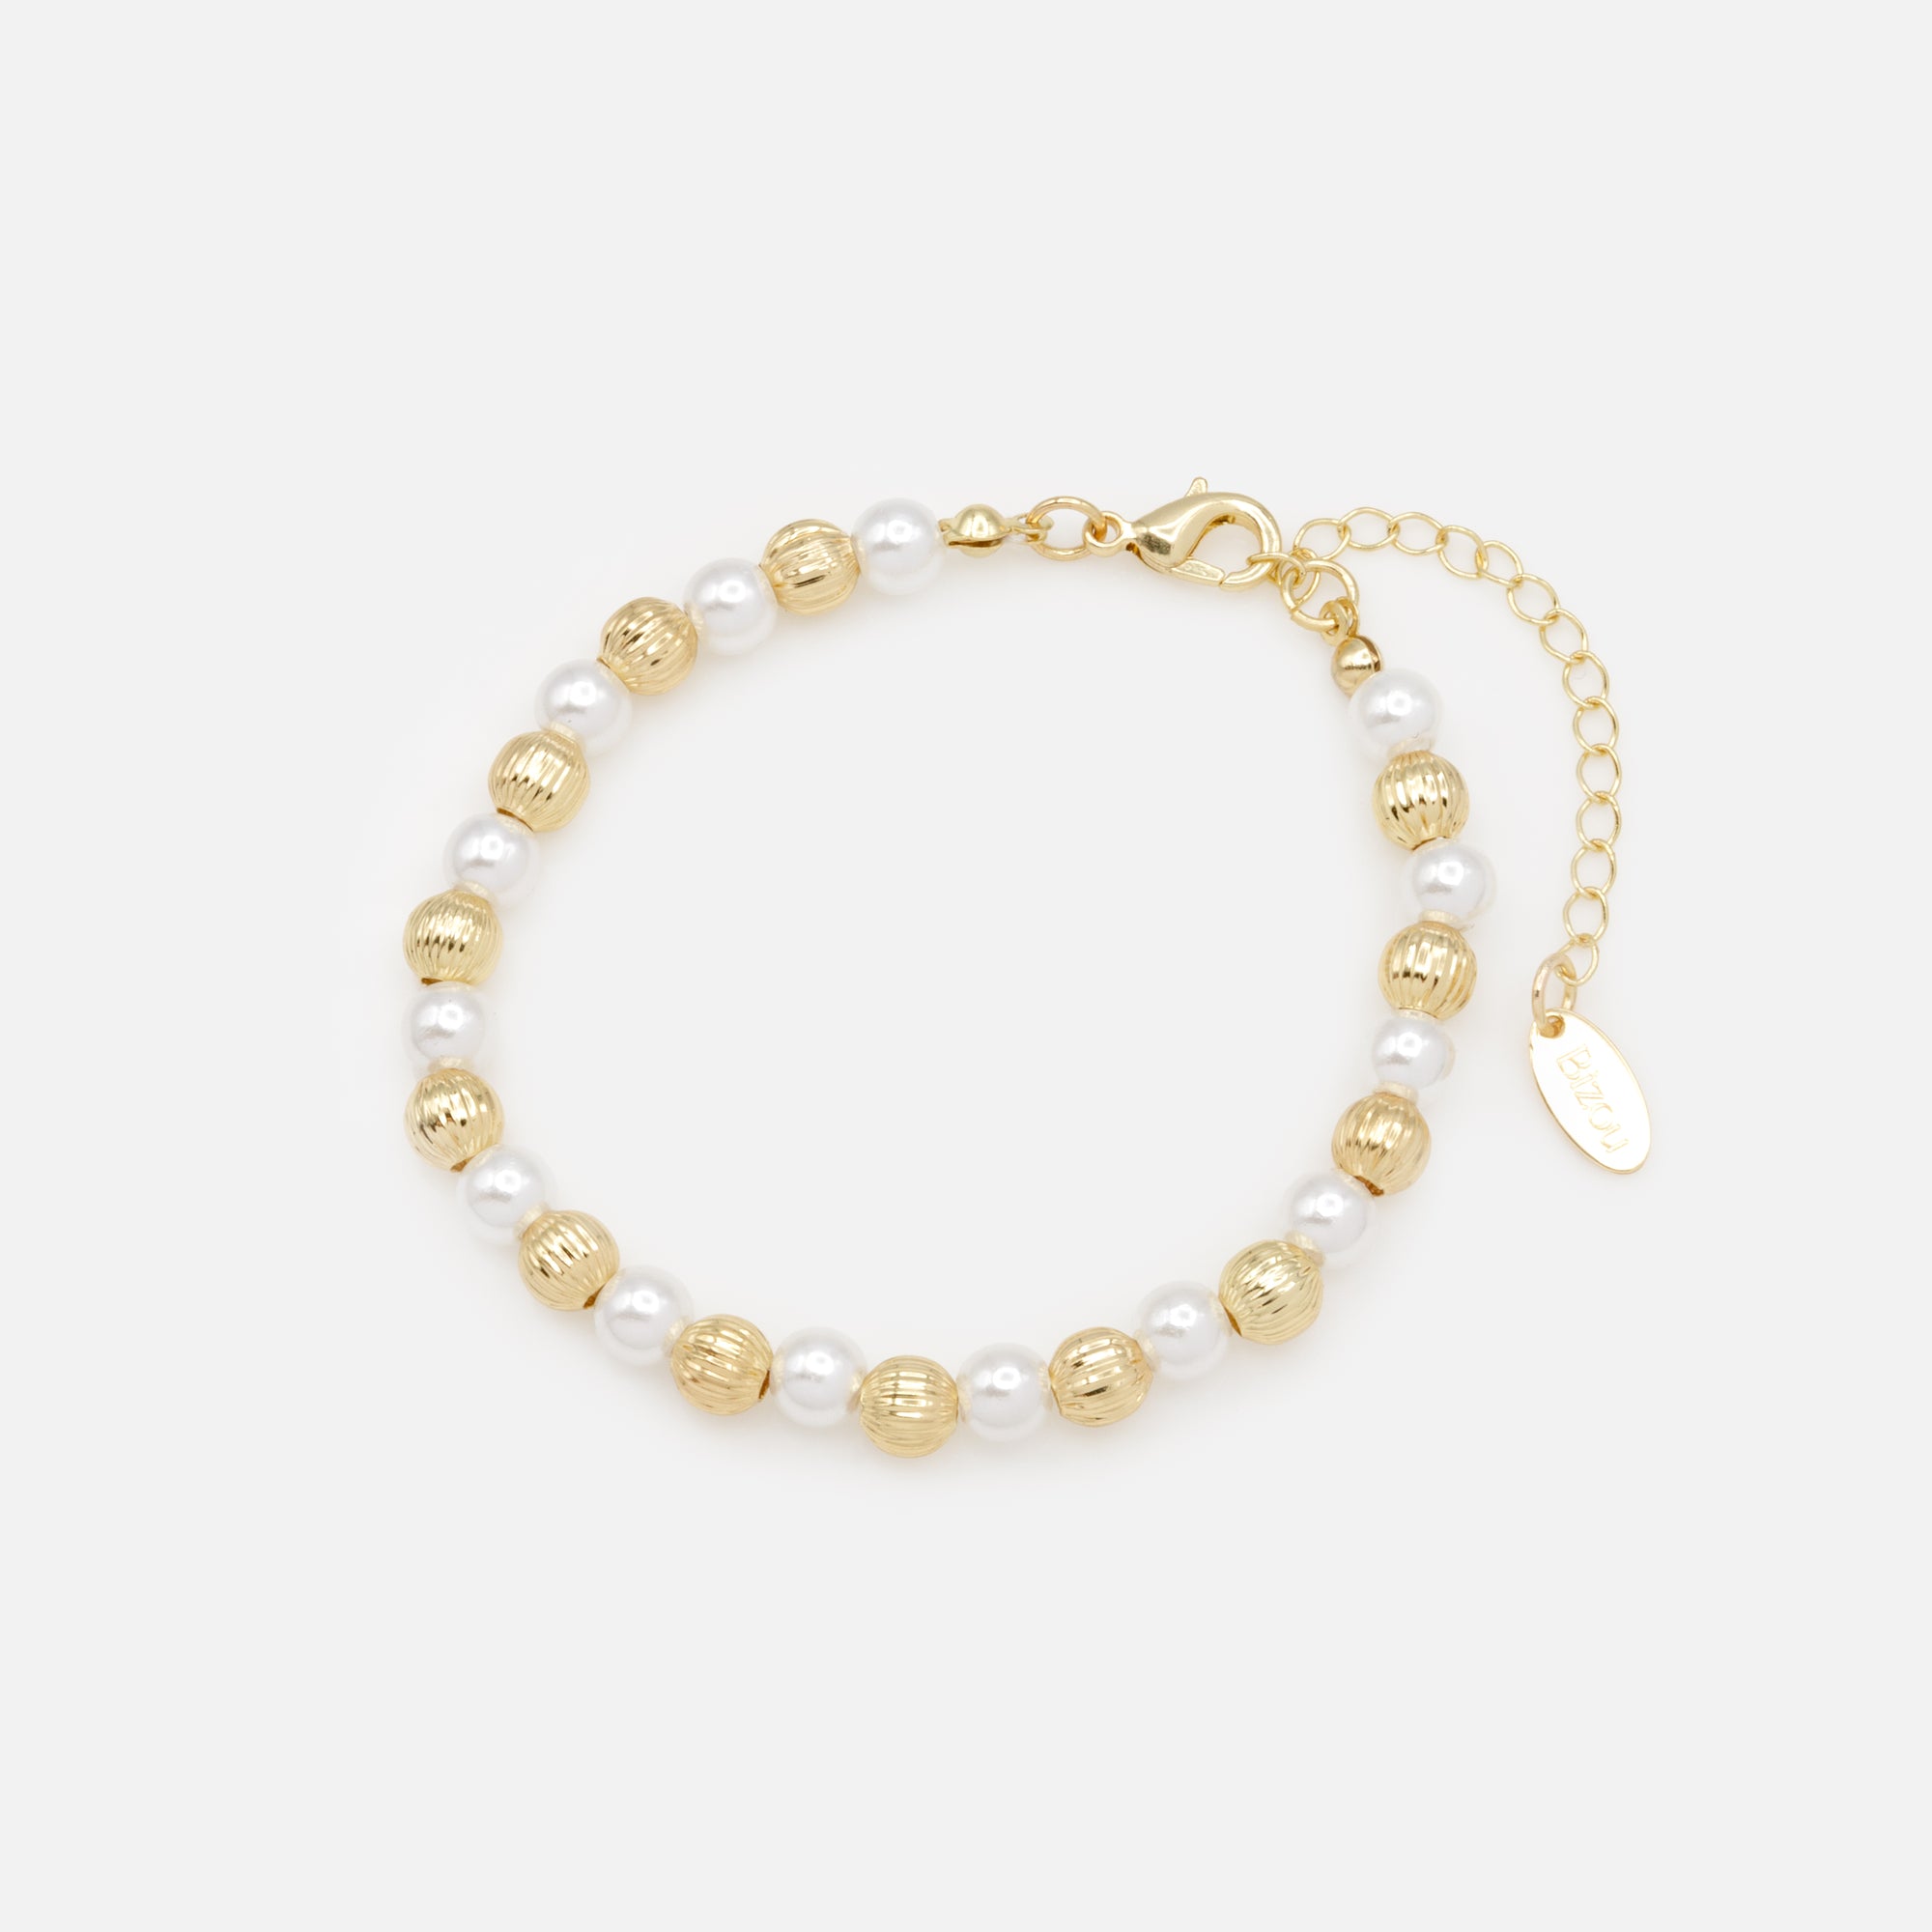 Pearl and ball bracelet with golden grooves